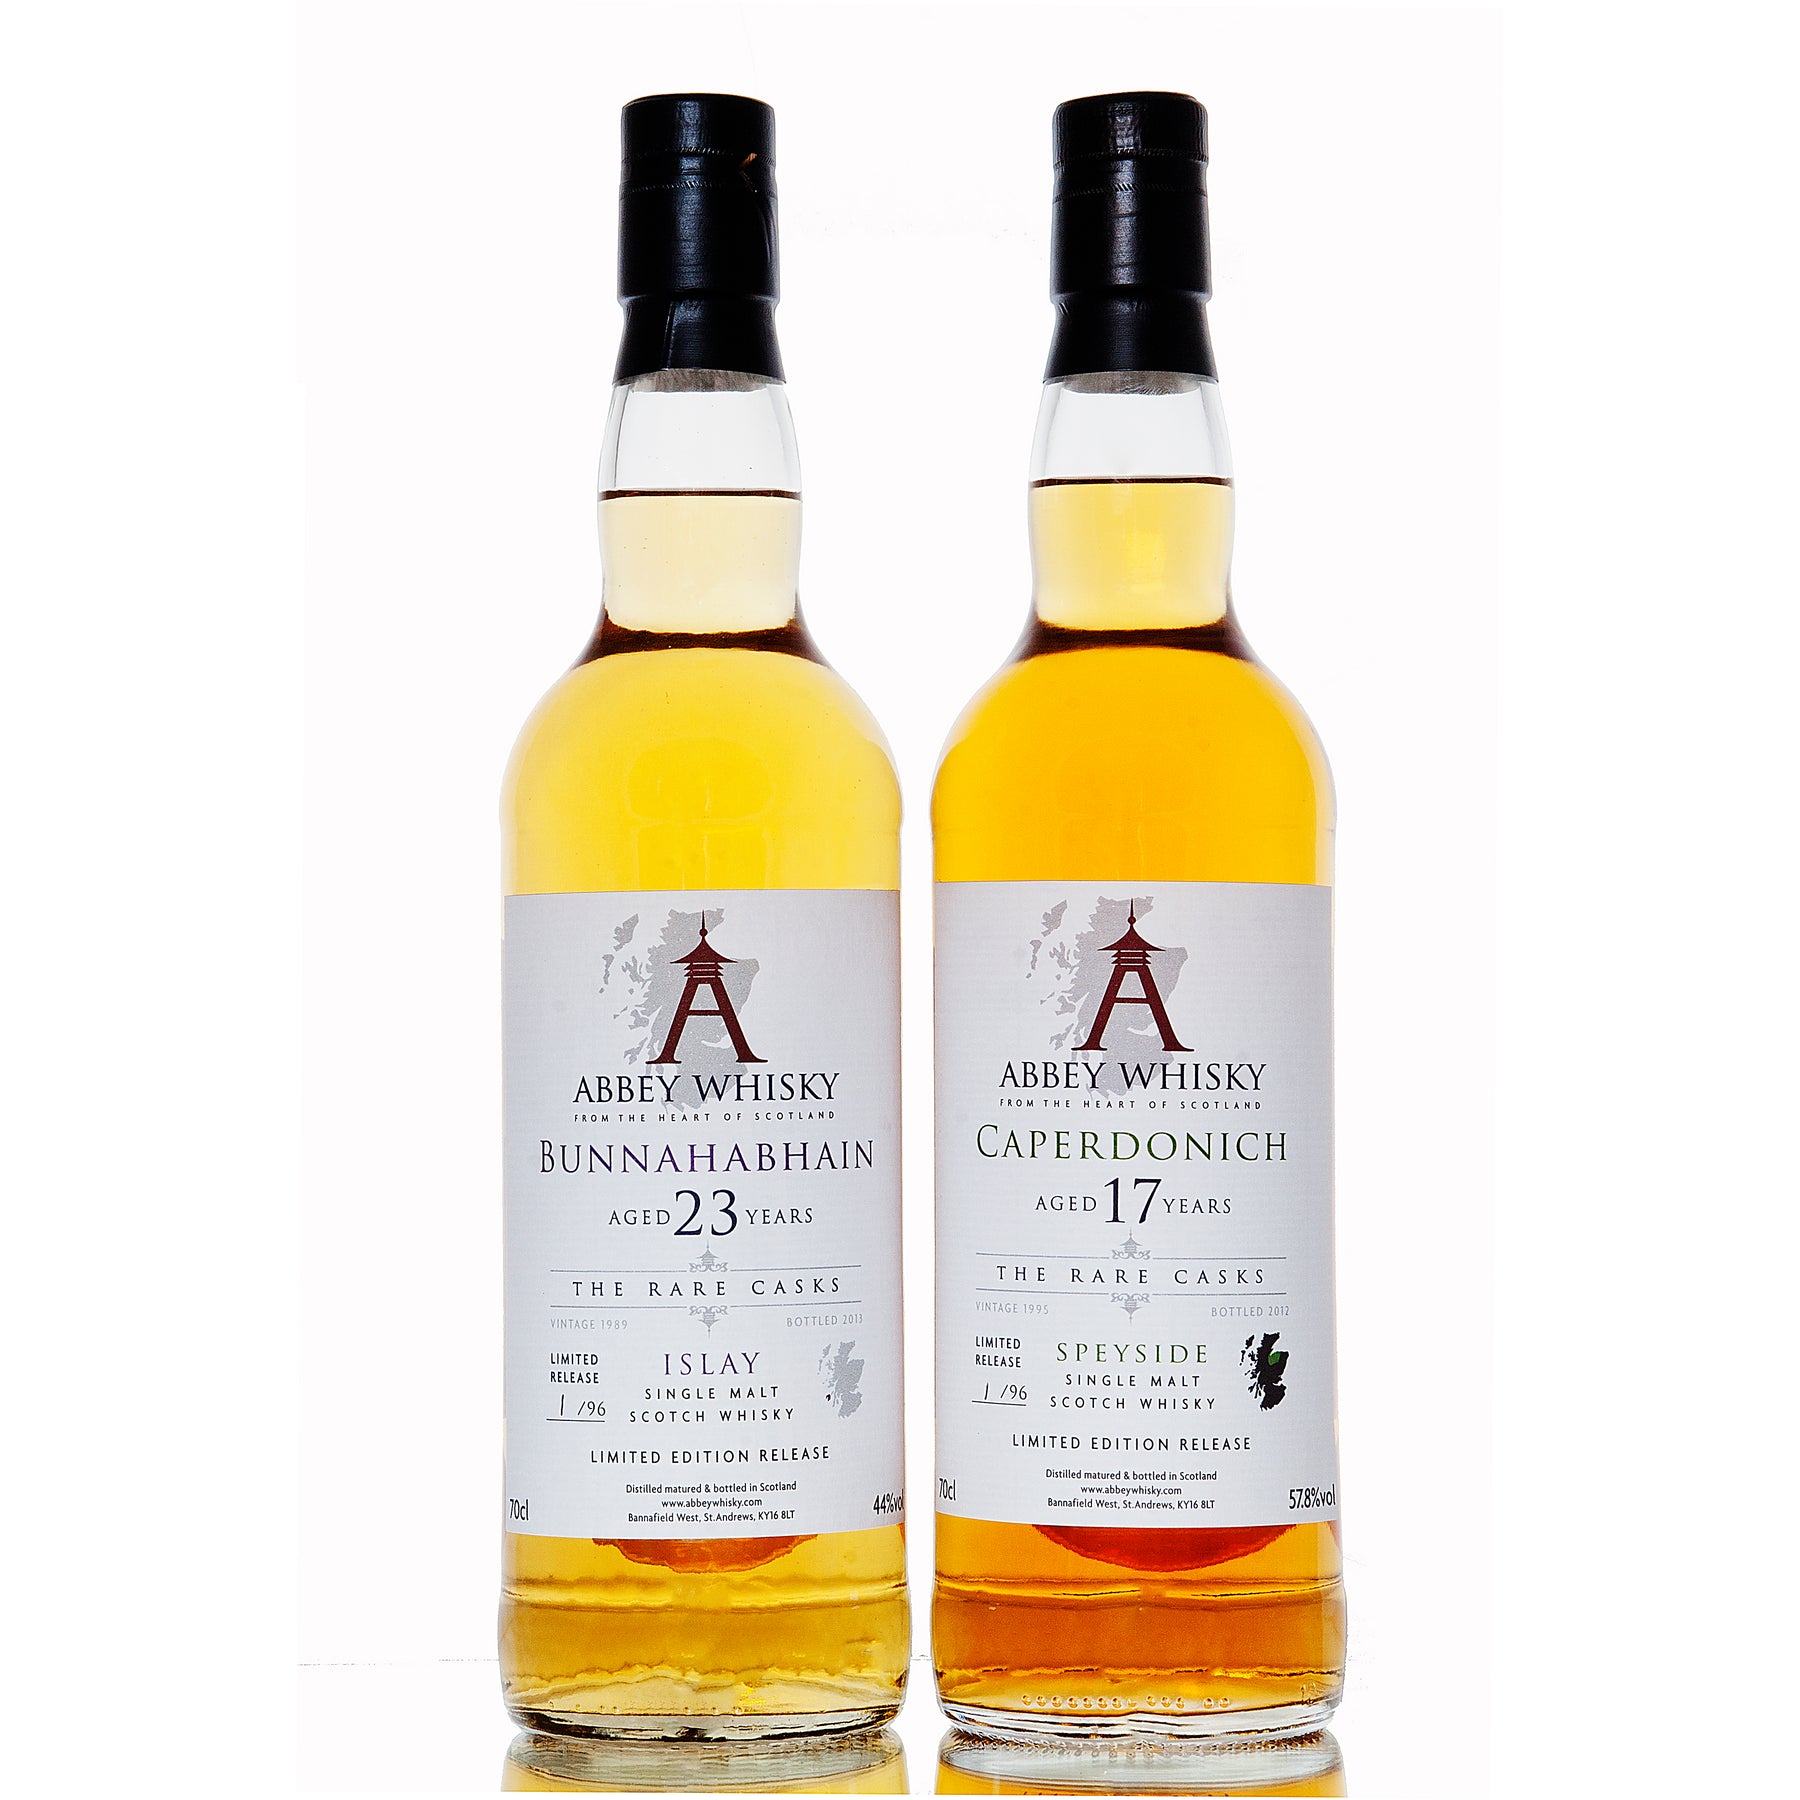 The 2nd release in ‘The Rare Casks’ series by Abbey Whisky has arrived!